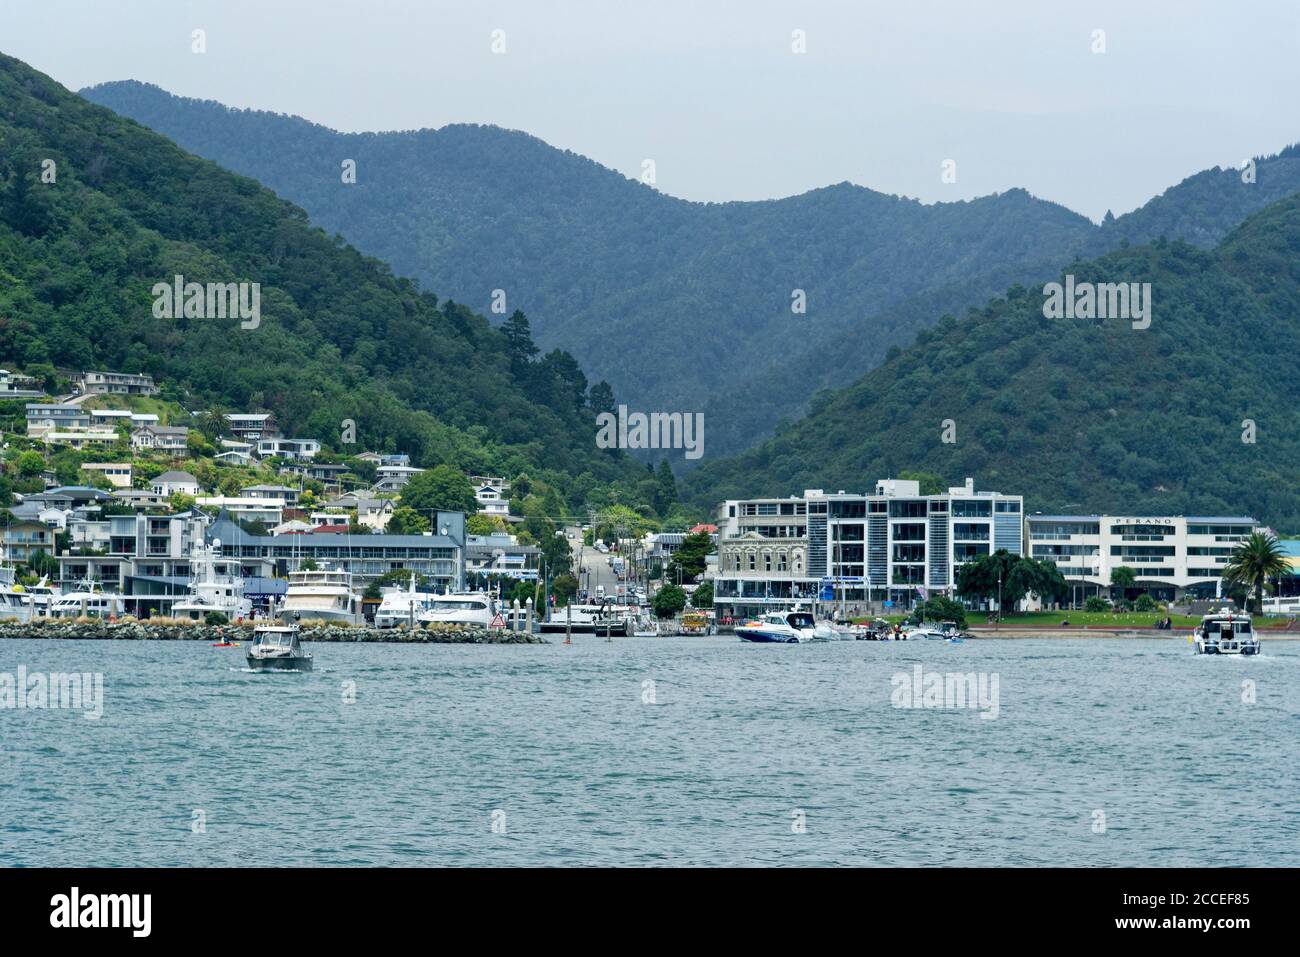 The town of Picton, Marlborough, in the South Island of New Zealand Stock Photo